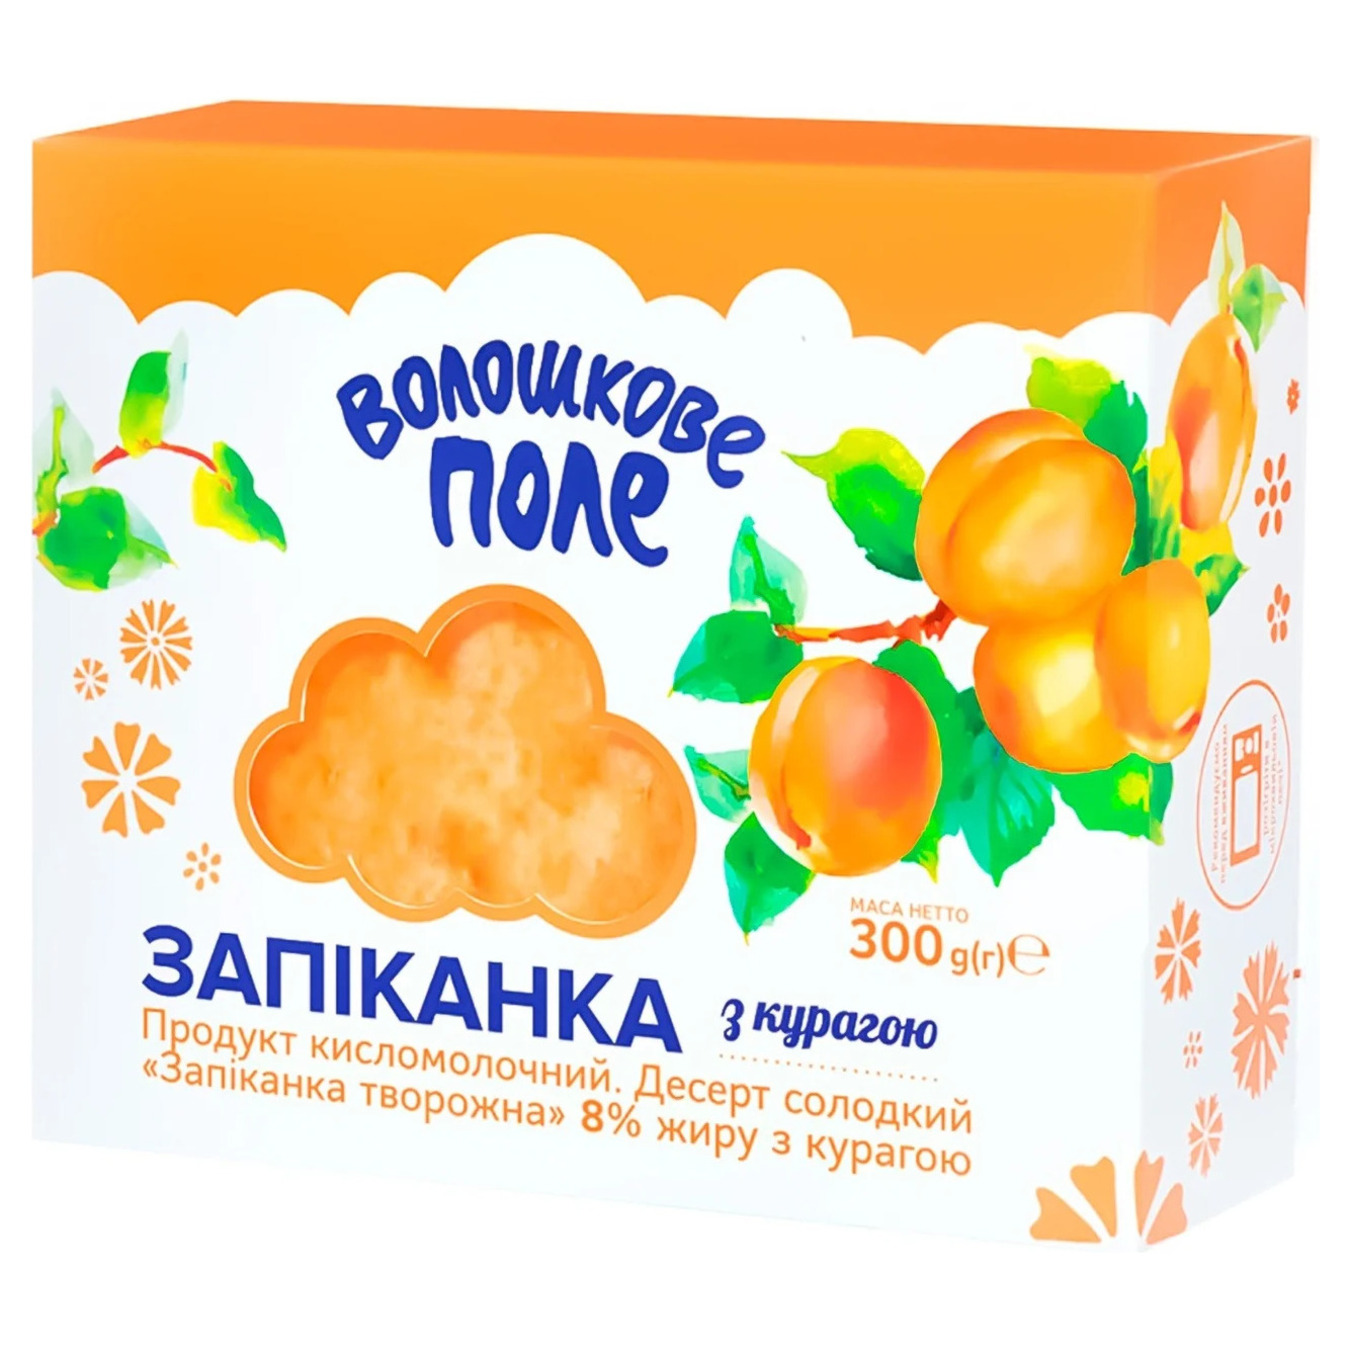 Voloshkove Pole Dried Apricots Cottage Cheese Baked